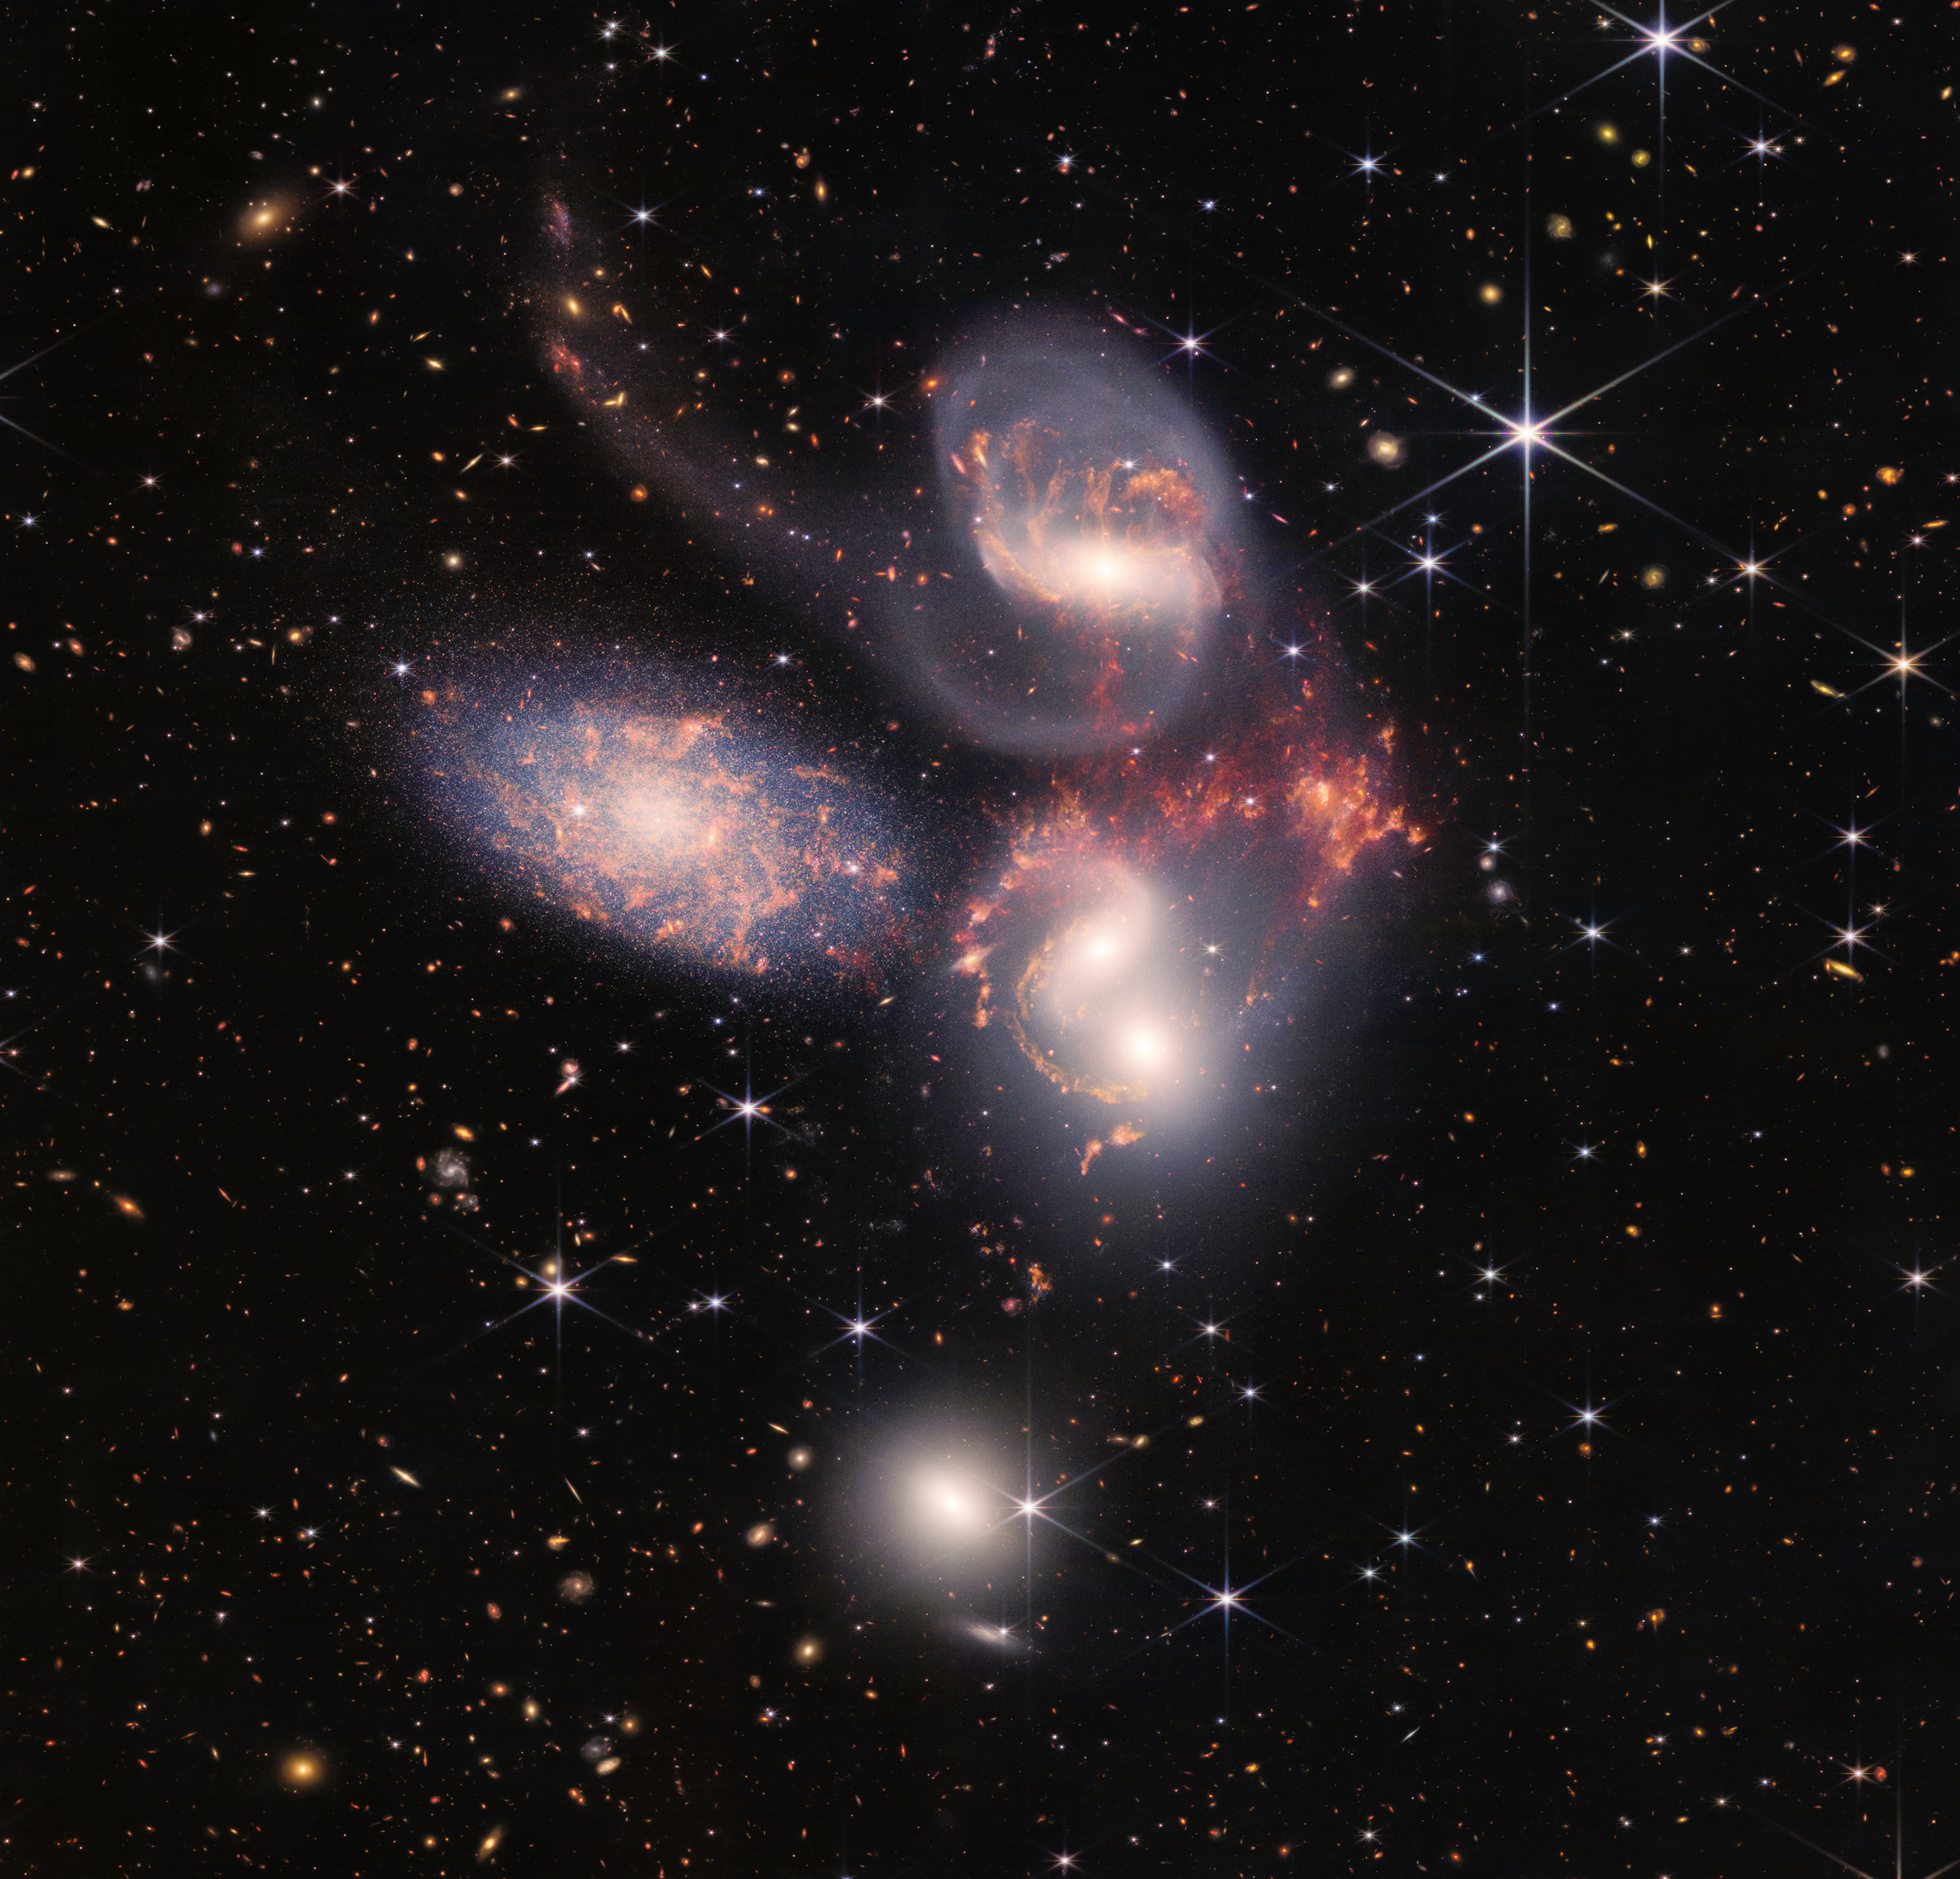 Stefan’s Quintet, a visual collection of five distant galaxies, was one of the Webb Telescope’s first full-colour images